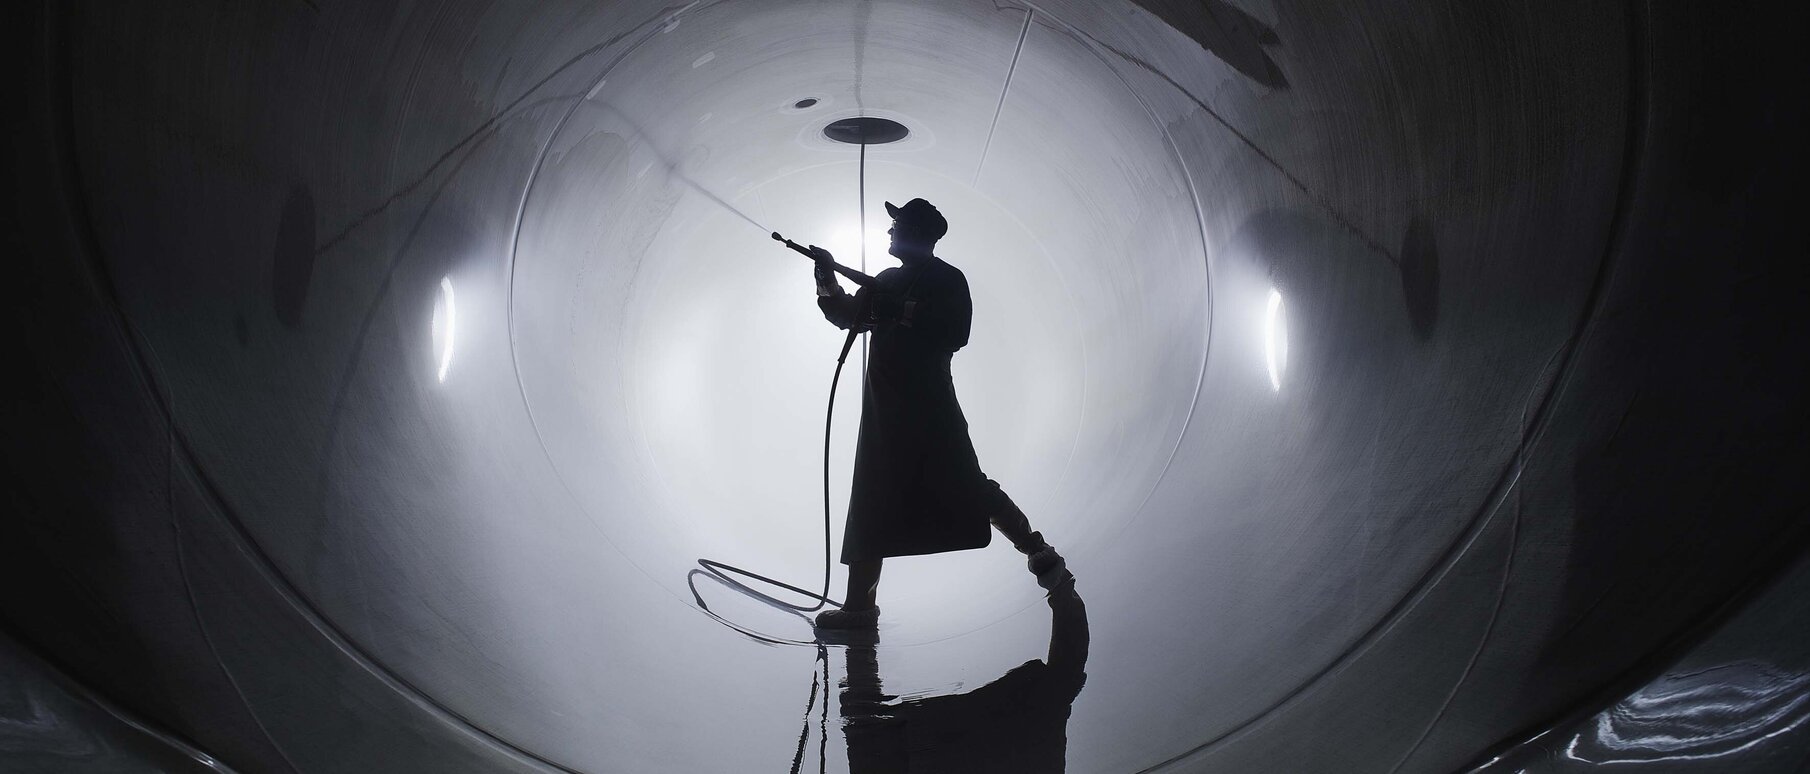 Man in safety clothing stands in a pipe and cleans it with a high-pressure cleaner